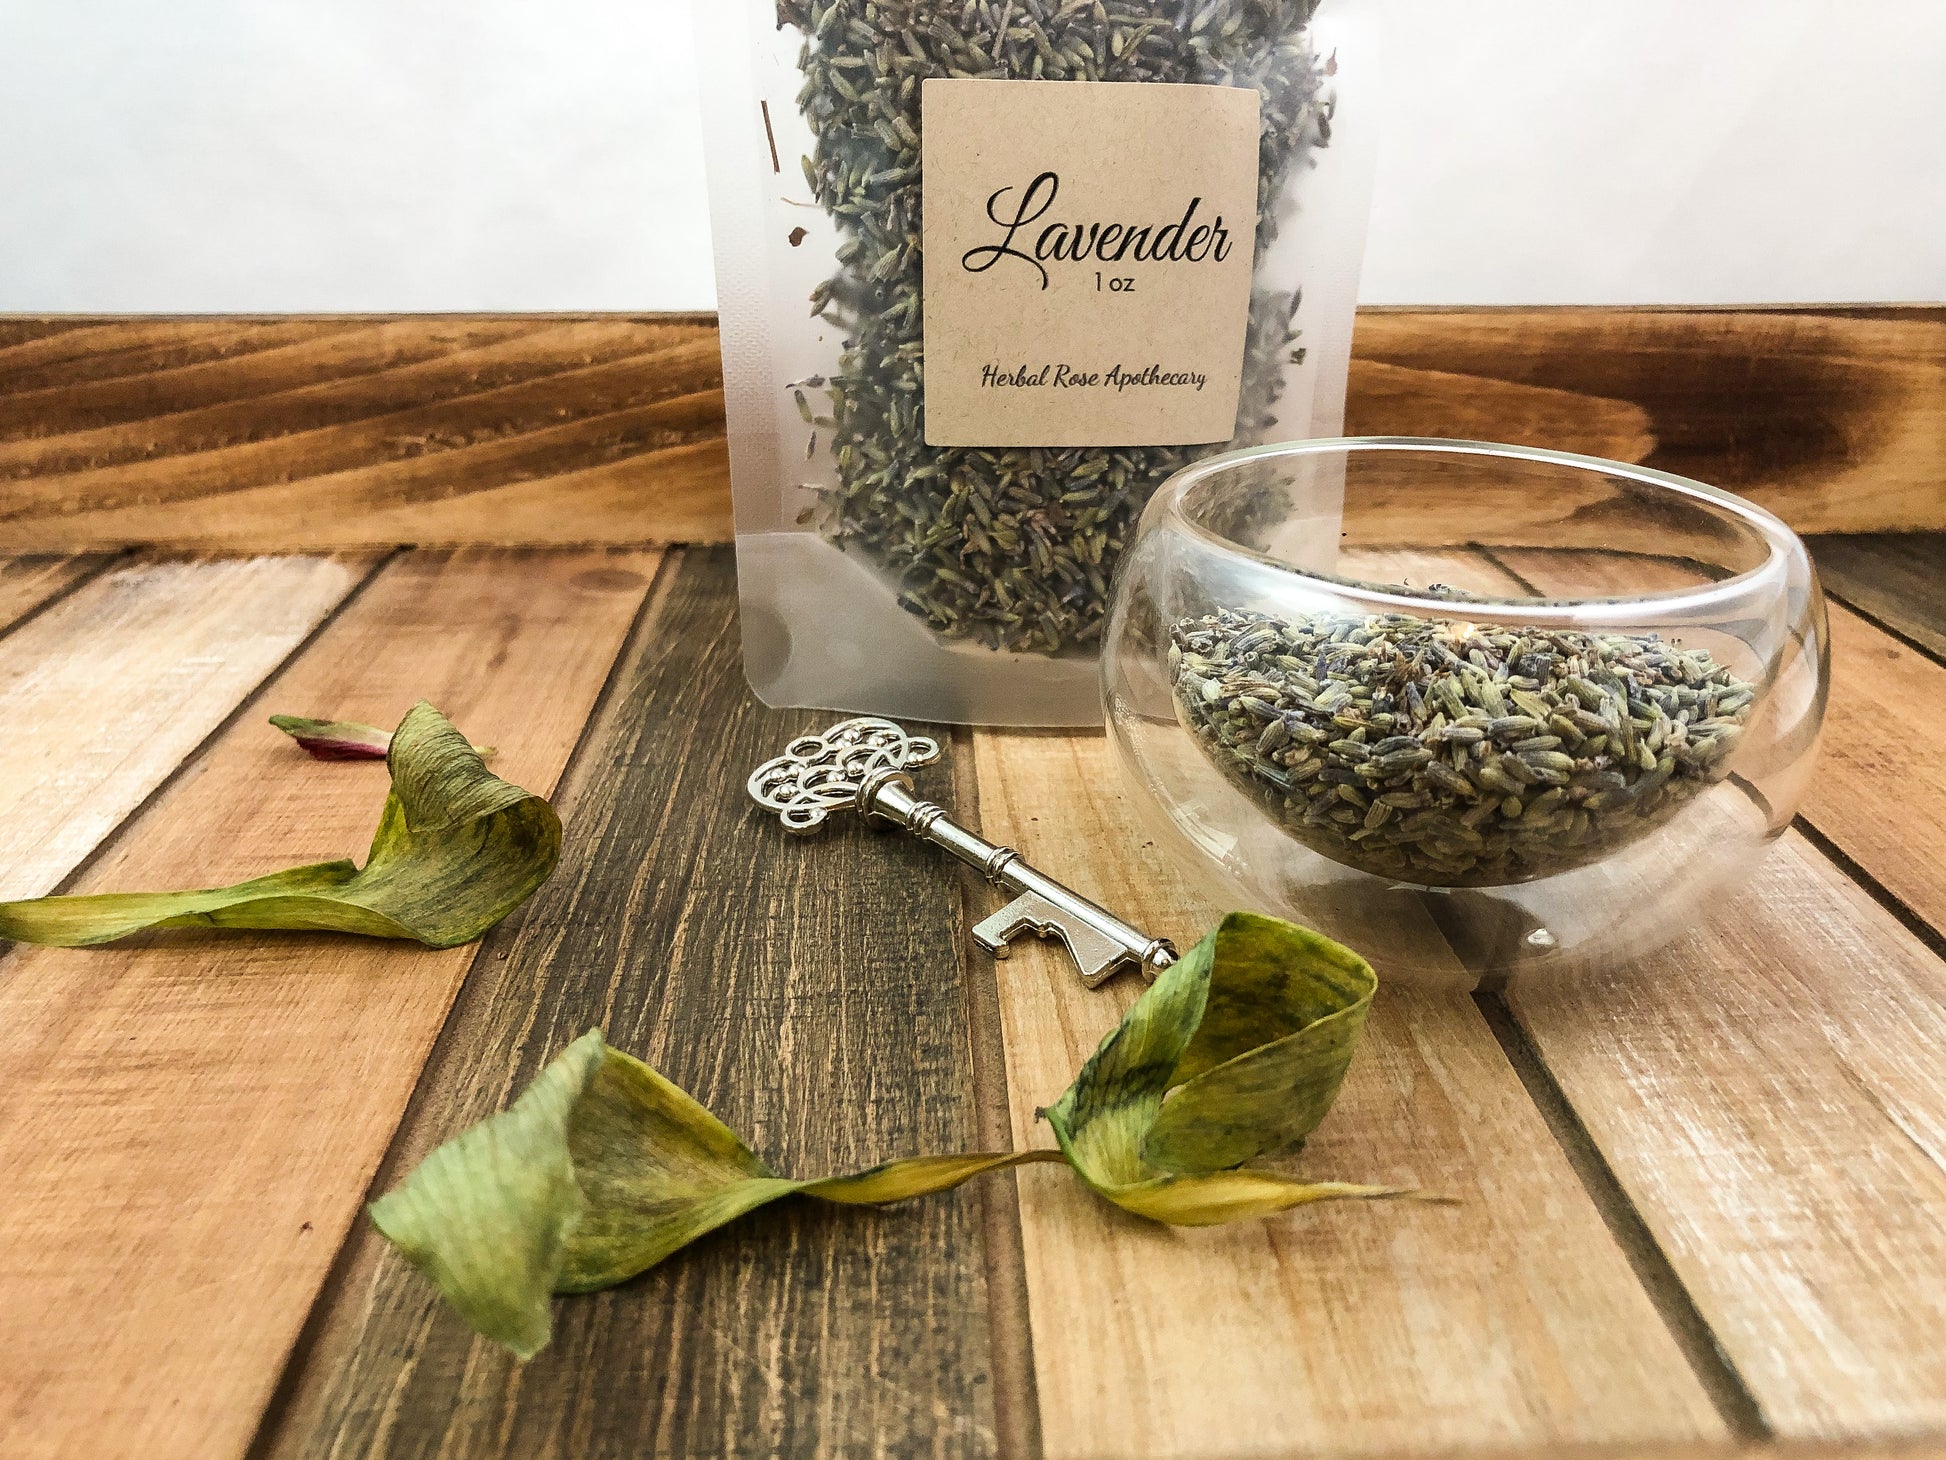 image of dried lavender in a clear bag, dried lavender in a small clear glass cup, a silver key and green leaves on wooden table with white background